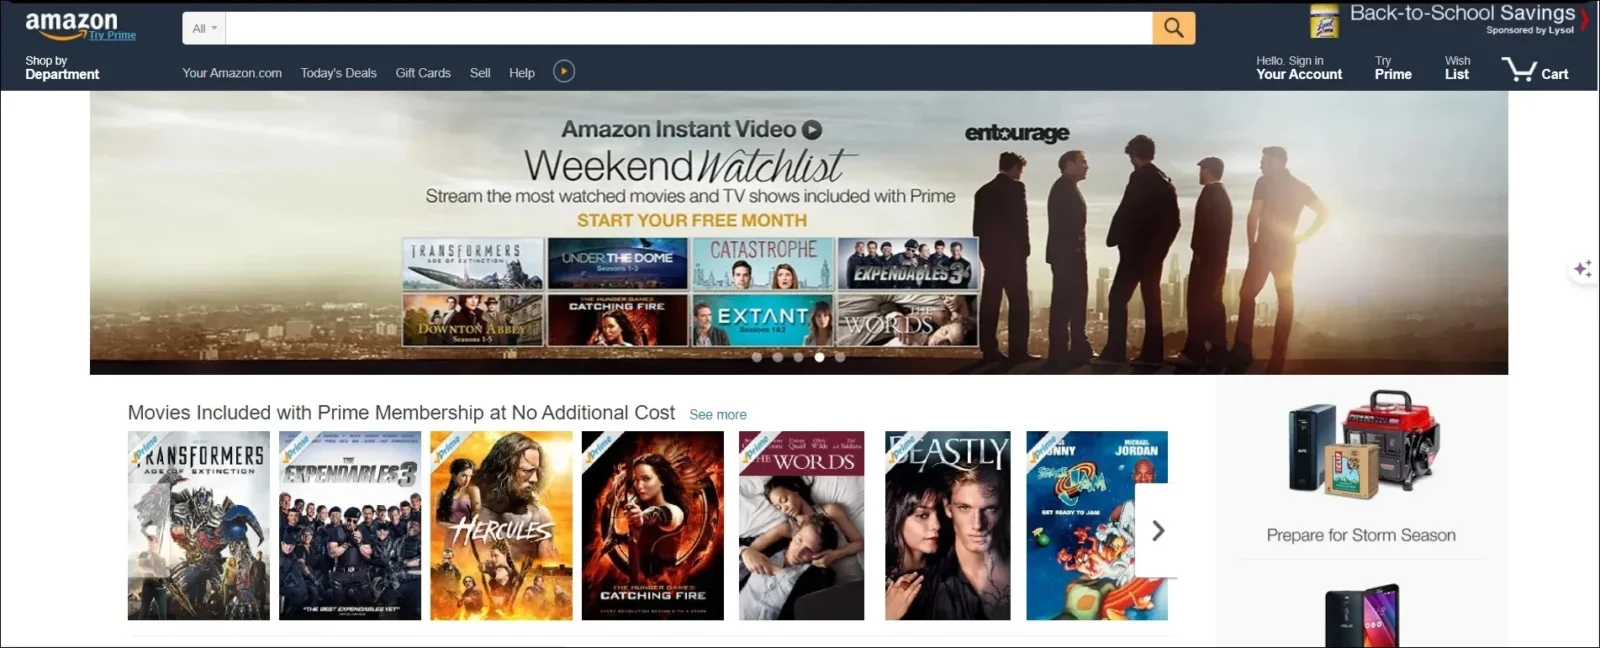 Amazon's page design in 2015